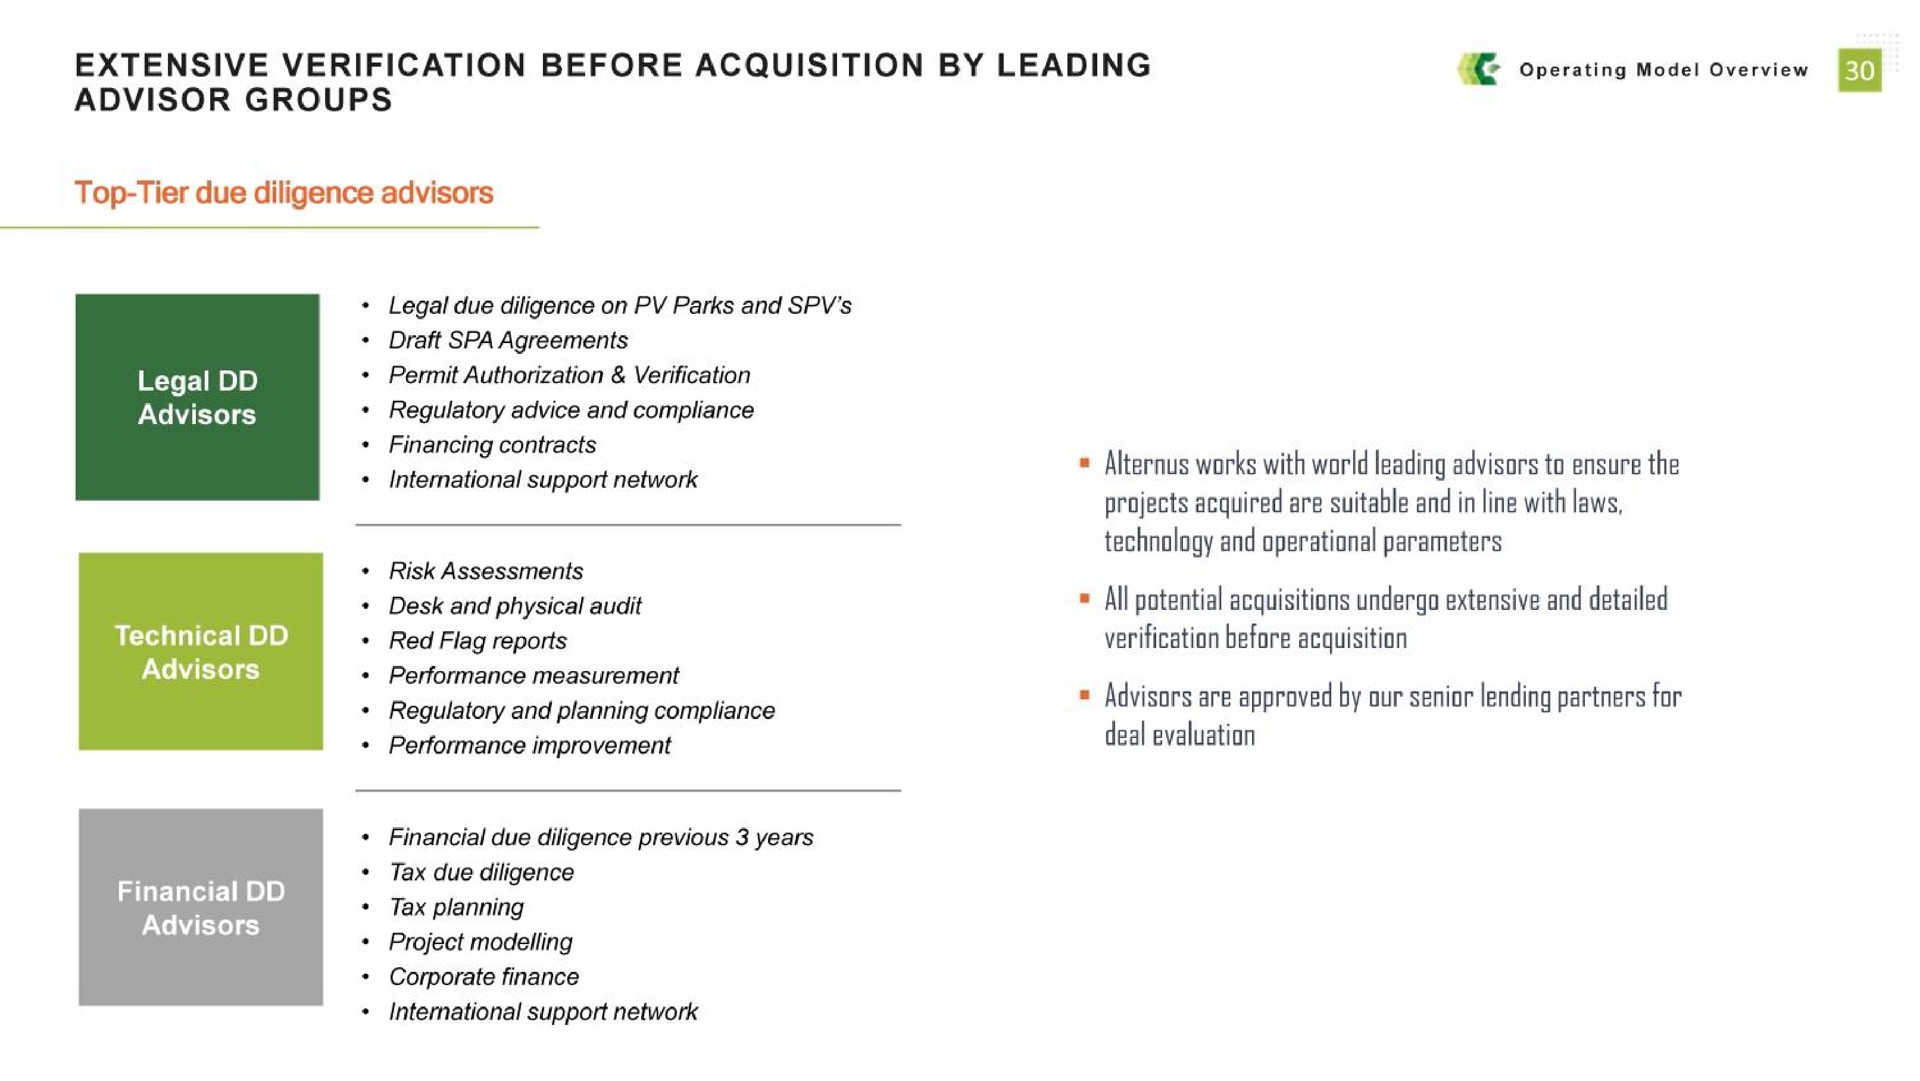 extensive verification before acquisition by leading advisor groups operating model overview works with world leading advisors to ensure the projects acquired are suitable and in line with laws technology and operational parameters all potential acquisitions undergo extensive and detailed verification before acquisition advisors are approved by our senior lending partners for deal evaluation | Alternus Energy